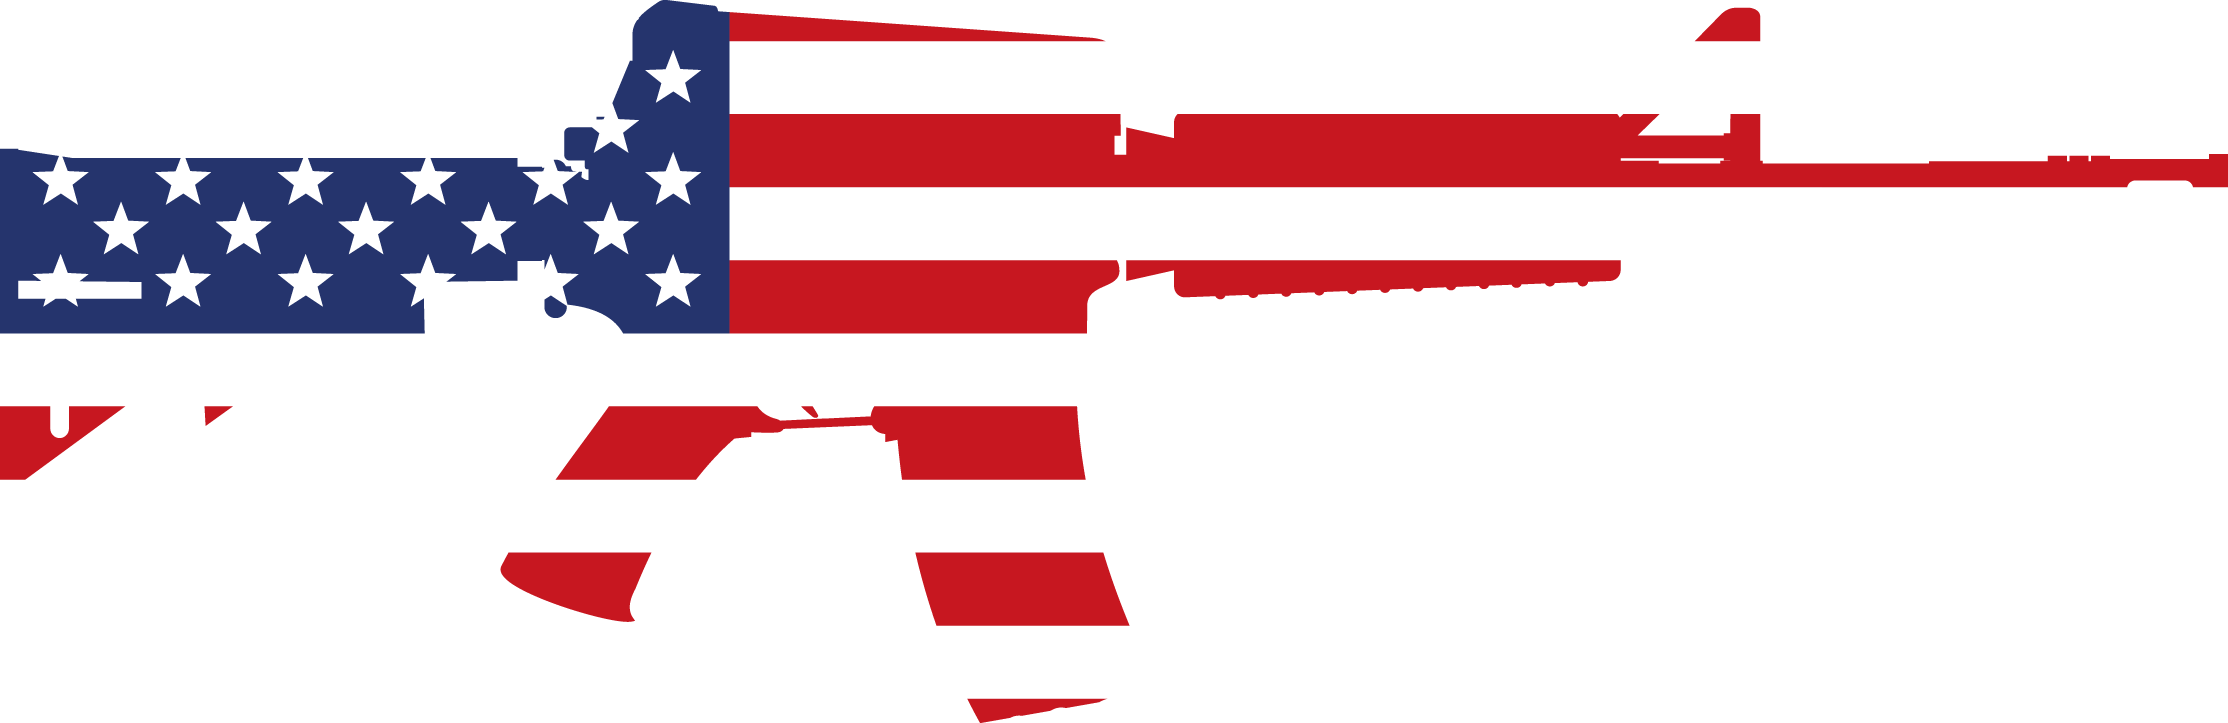 Image: Silhouette of an AR-15 rifle. The American flag fills in the silhouette.